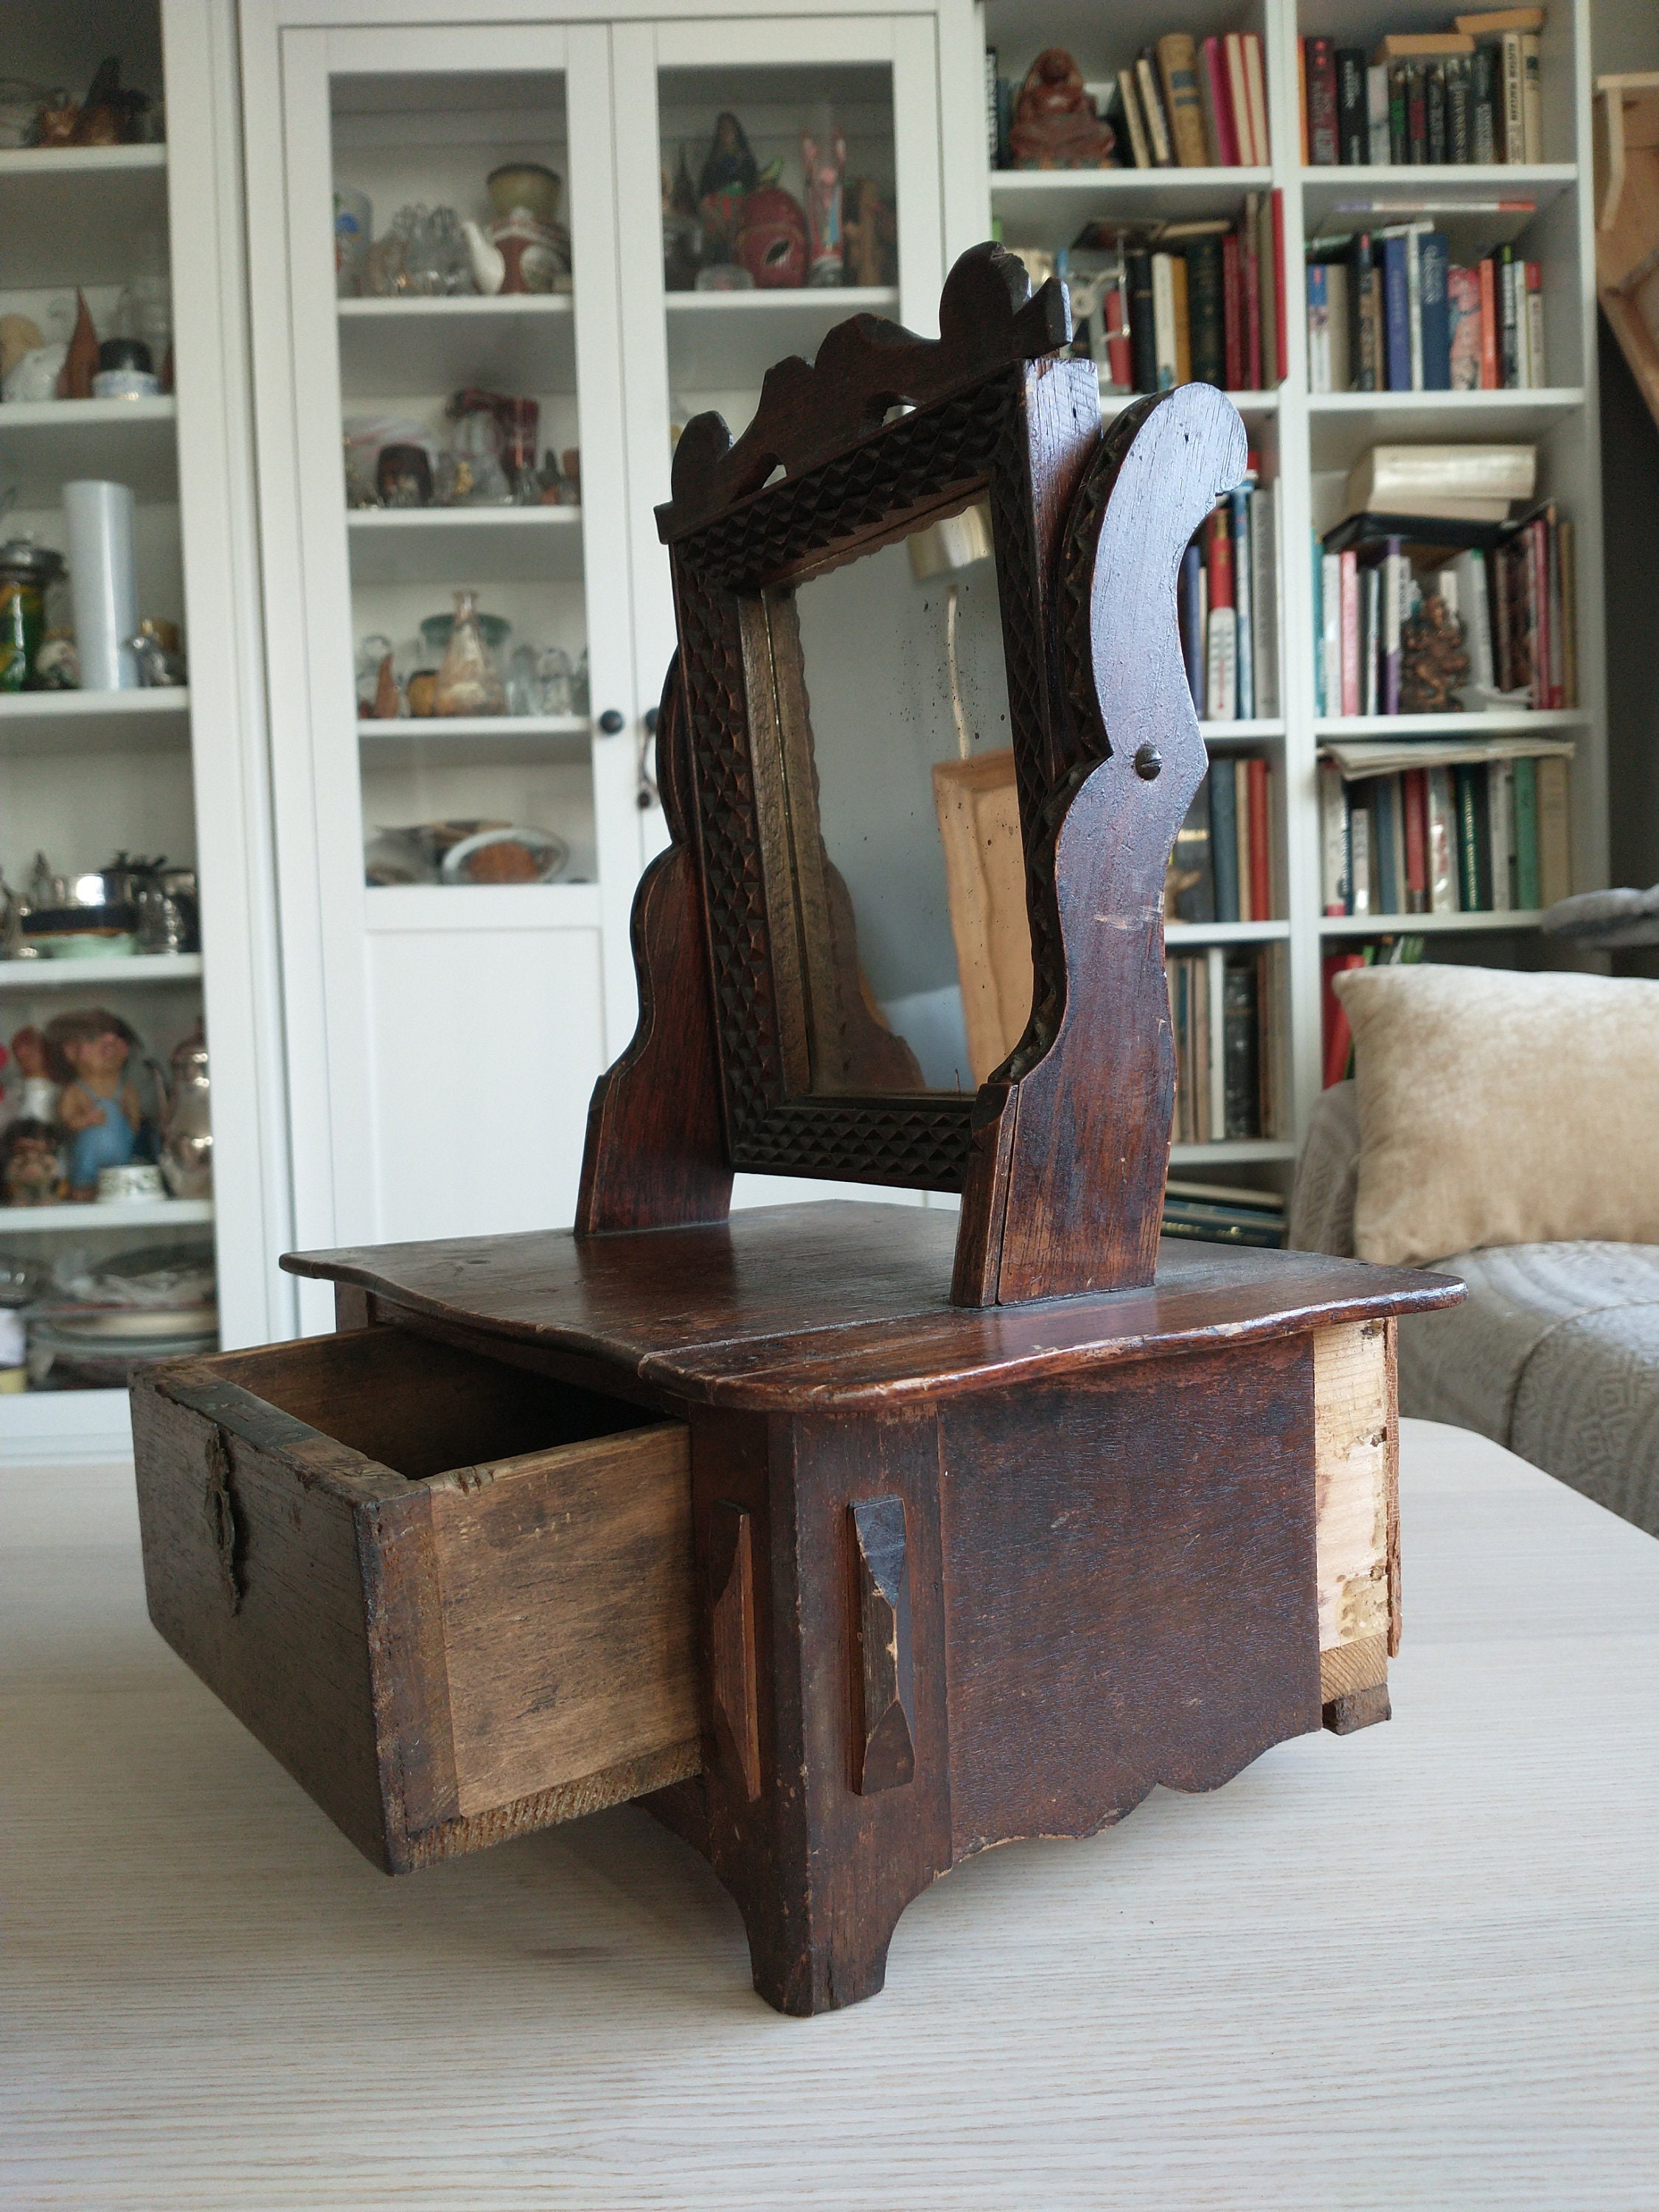 Antique Barber Mirror Stand for sale at Pamono